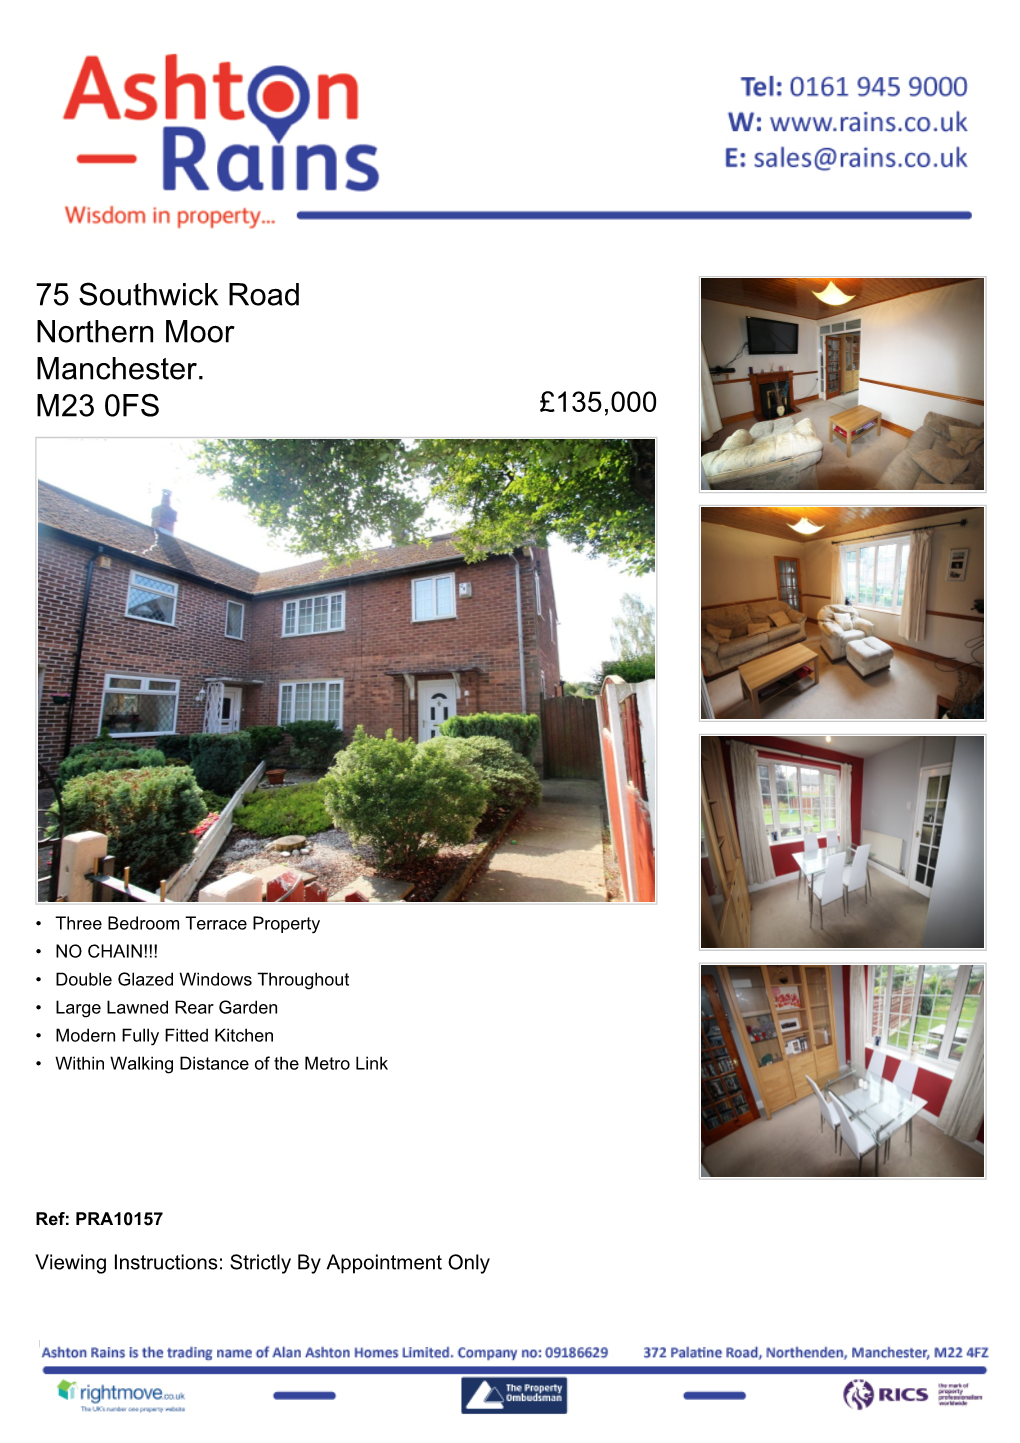 75 Southwick Road Northern Moor Manchester. M23 0FS £135,000